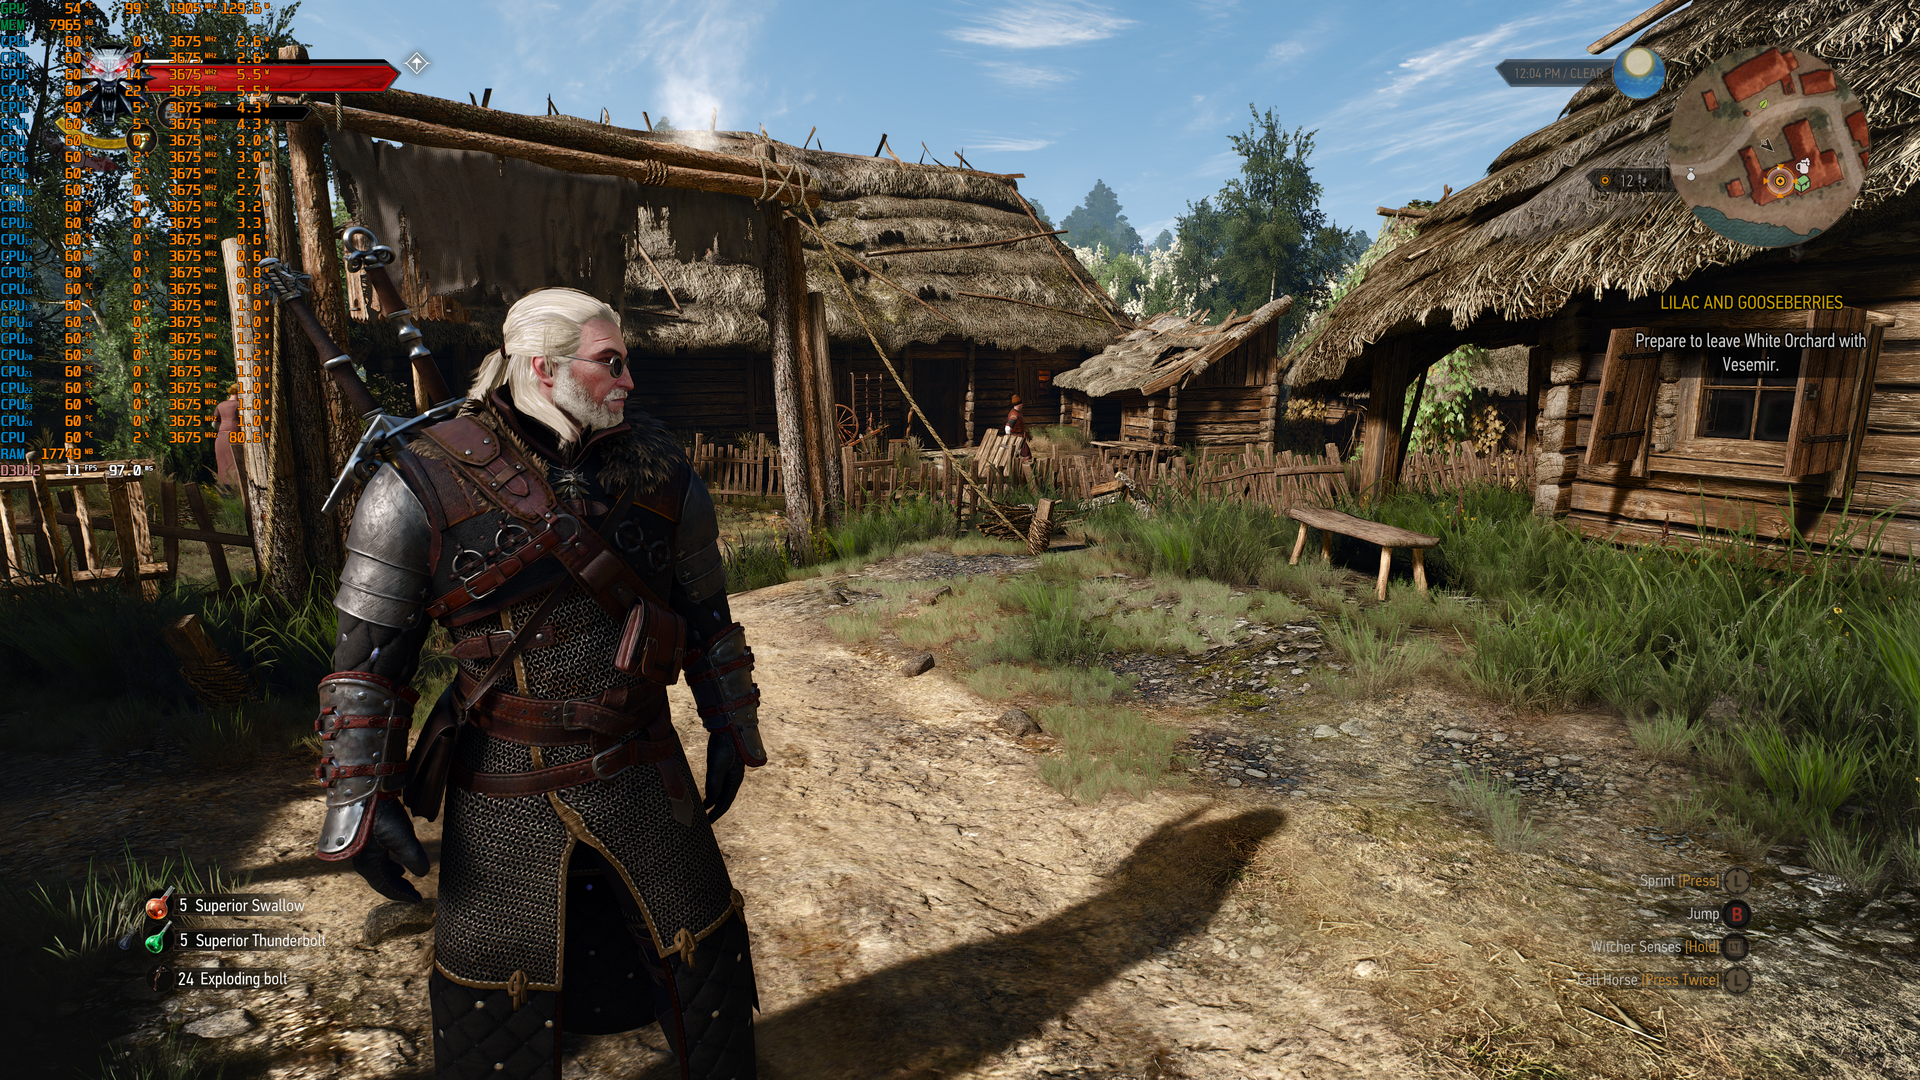 rsz_2the_witcher_3_screenshot_20221224_-_09175608.png